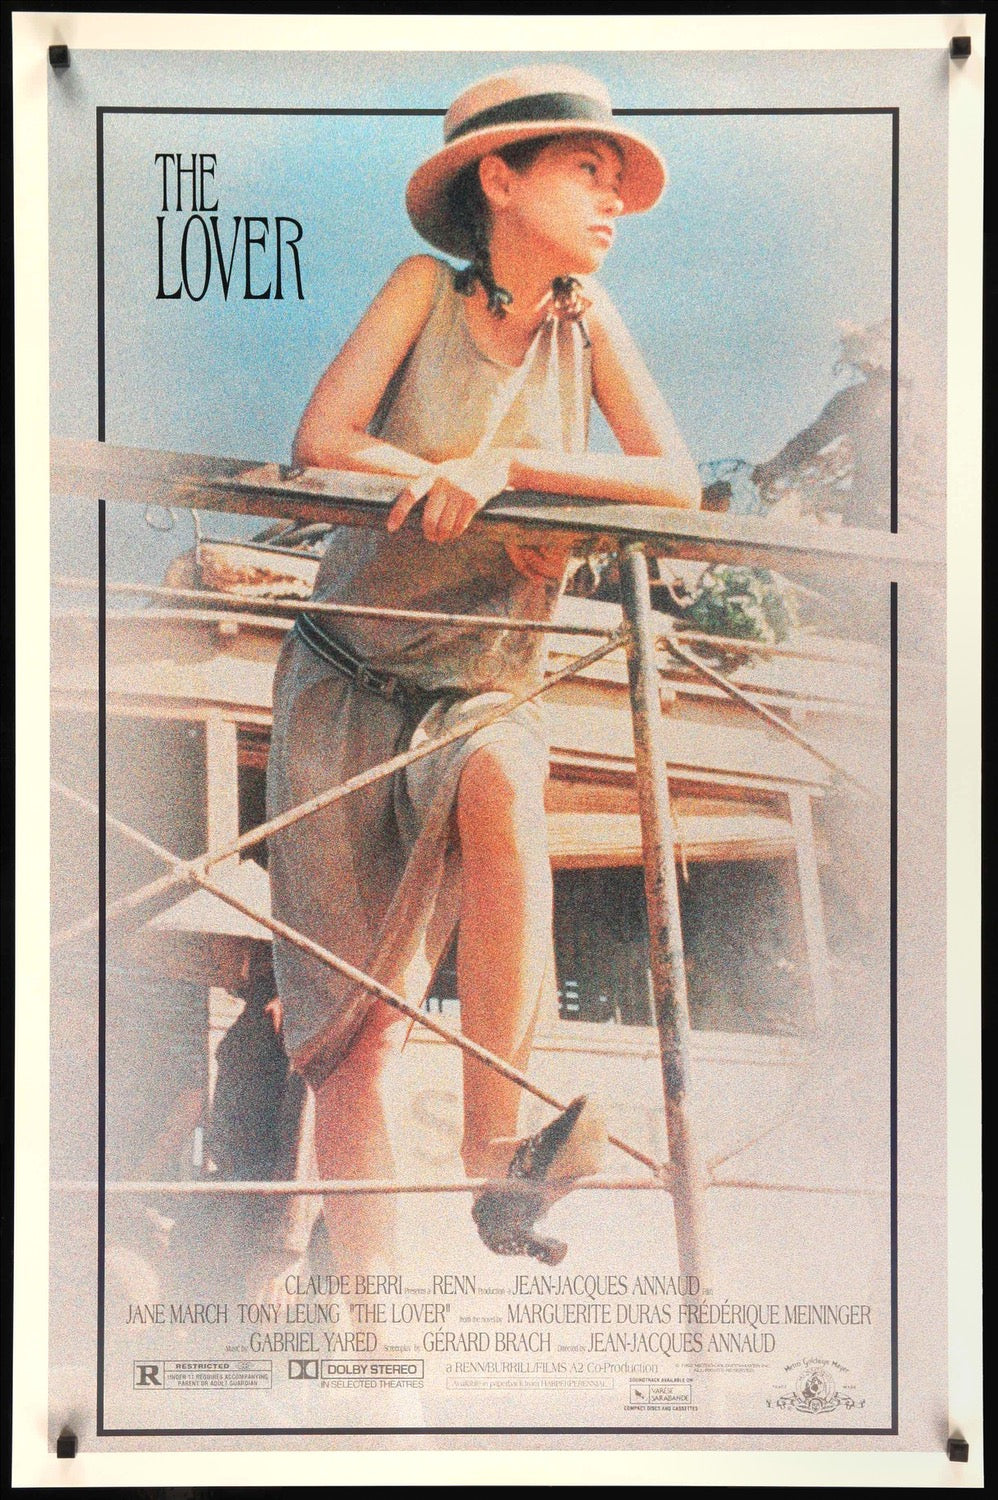 The Lover (1992)